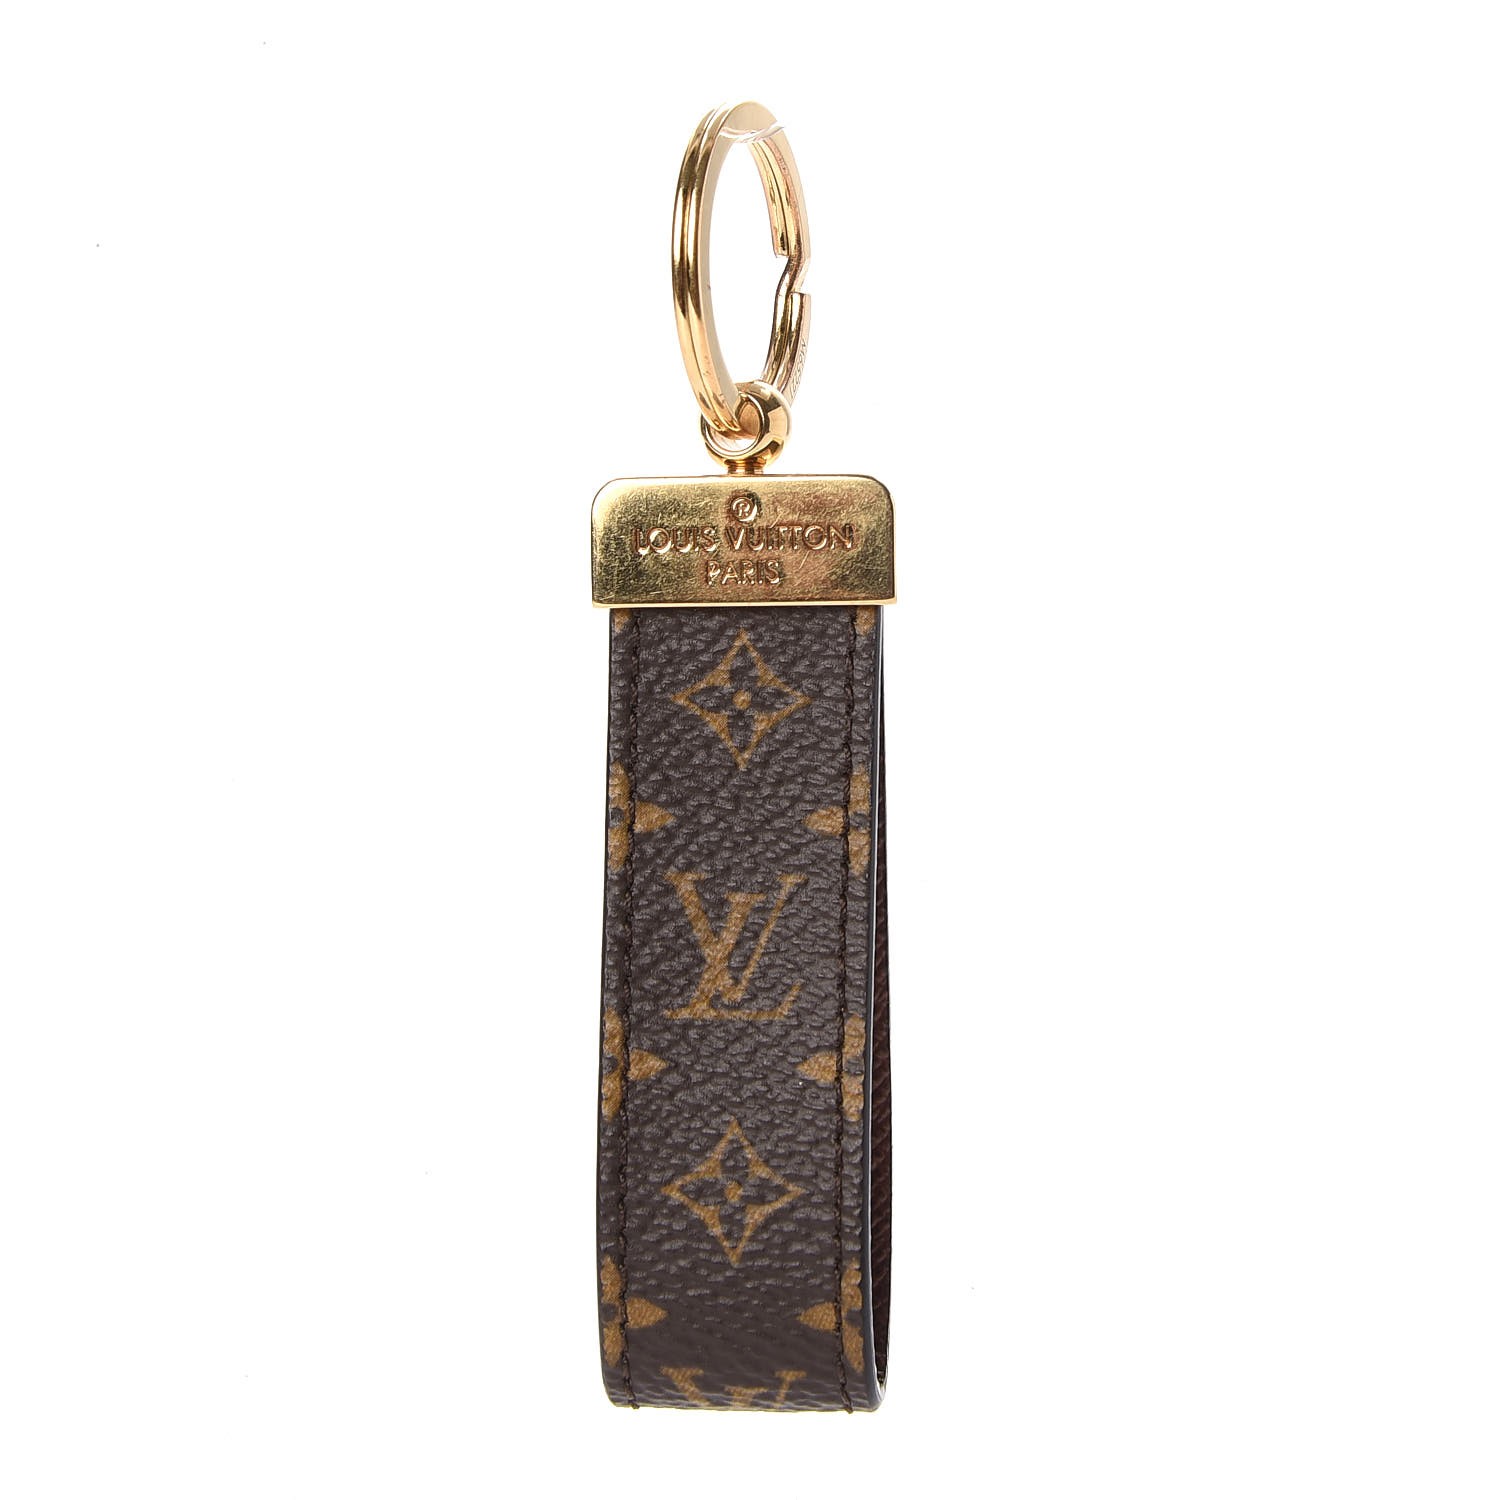 Anniv Coupon Below] New 2023 Lois Viton Party Favor Dauphine Dragonne Key  Holder M69000 From Phonpa, $12.72